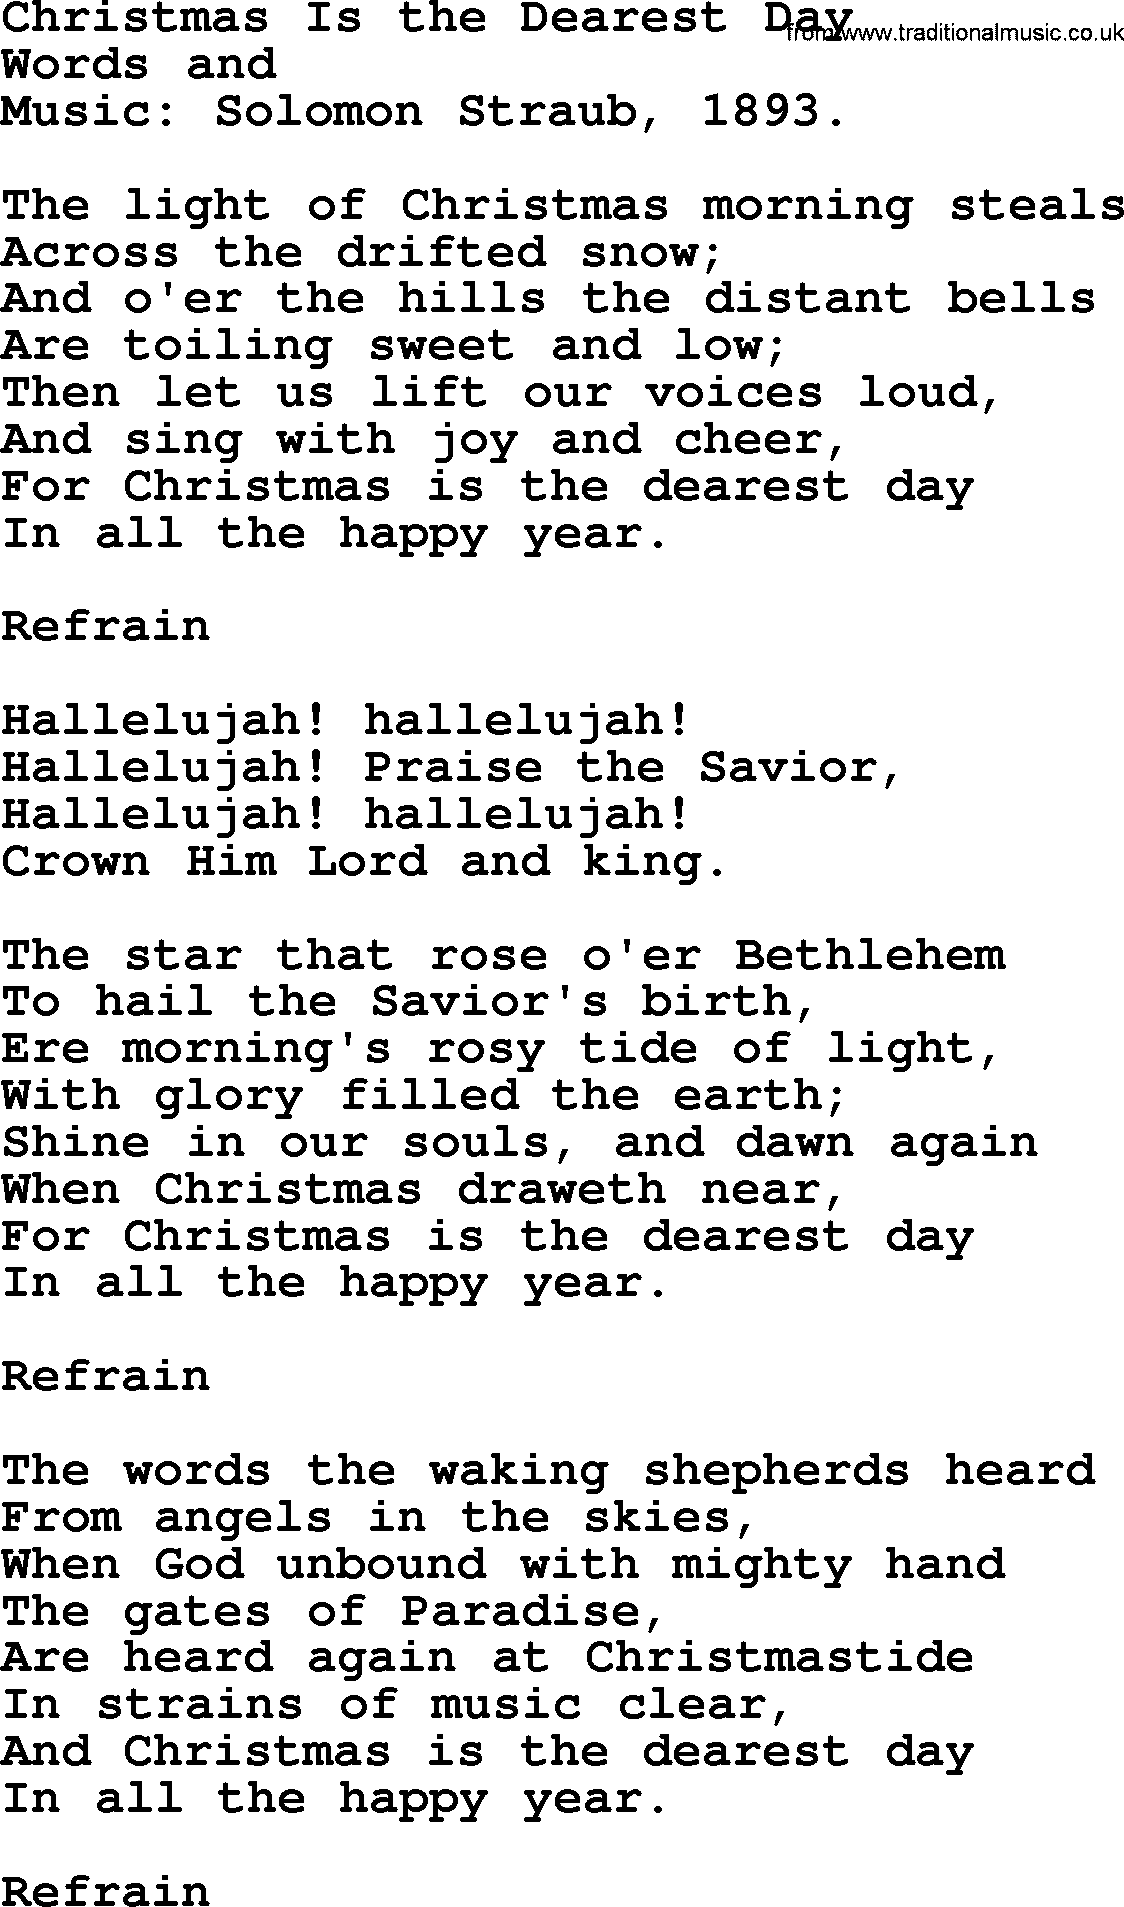 Christmas Hymns, Carols and Songs, title: Christmas Is The Dearest Day, lyrics with PDF